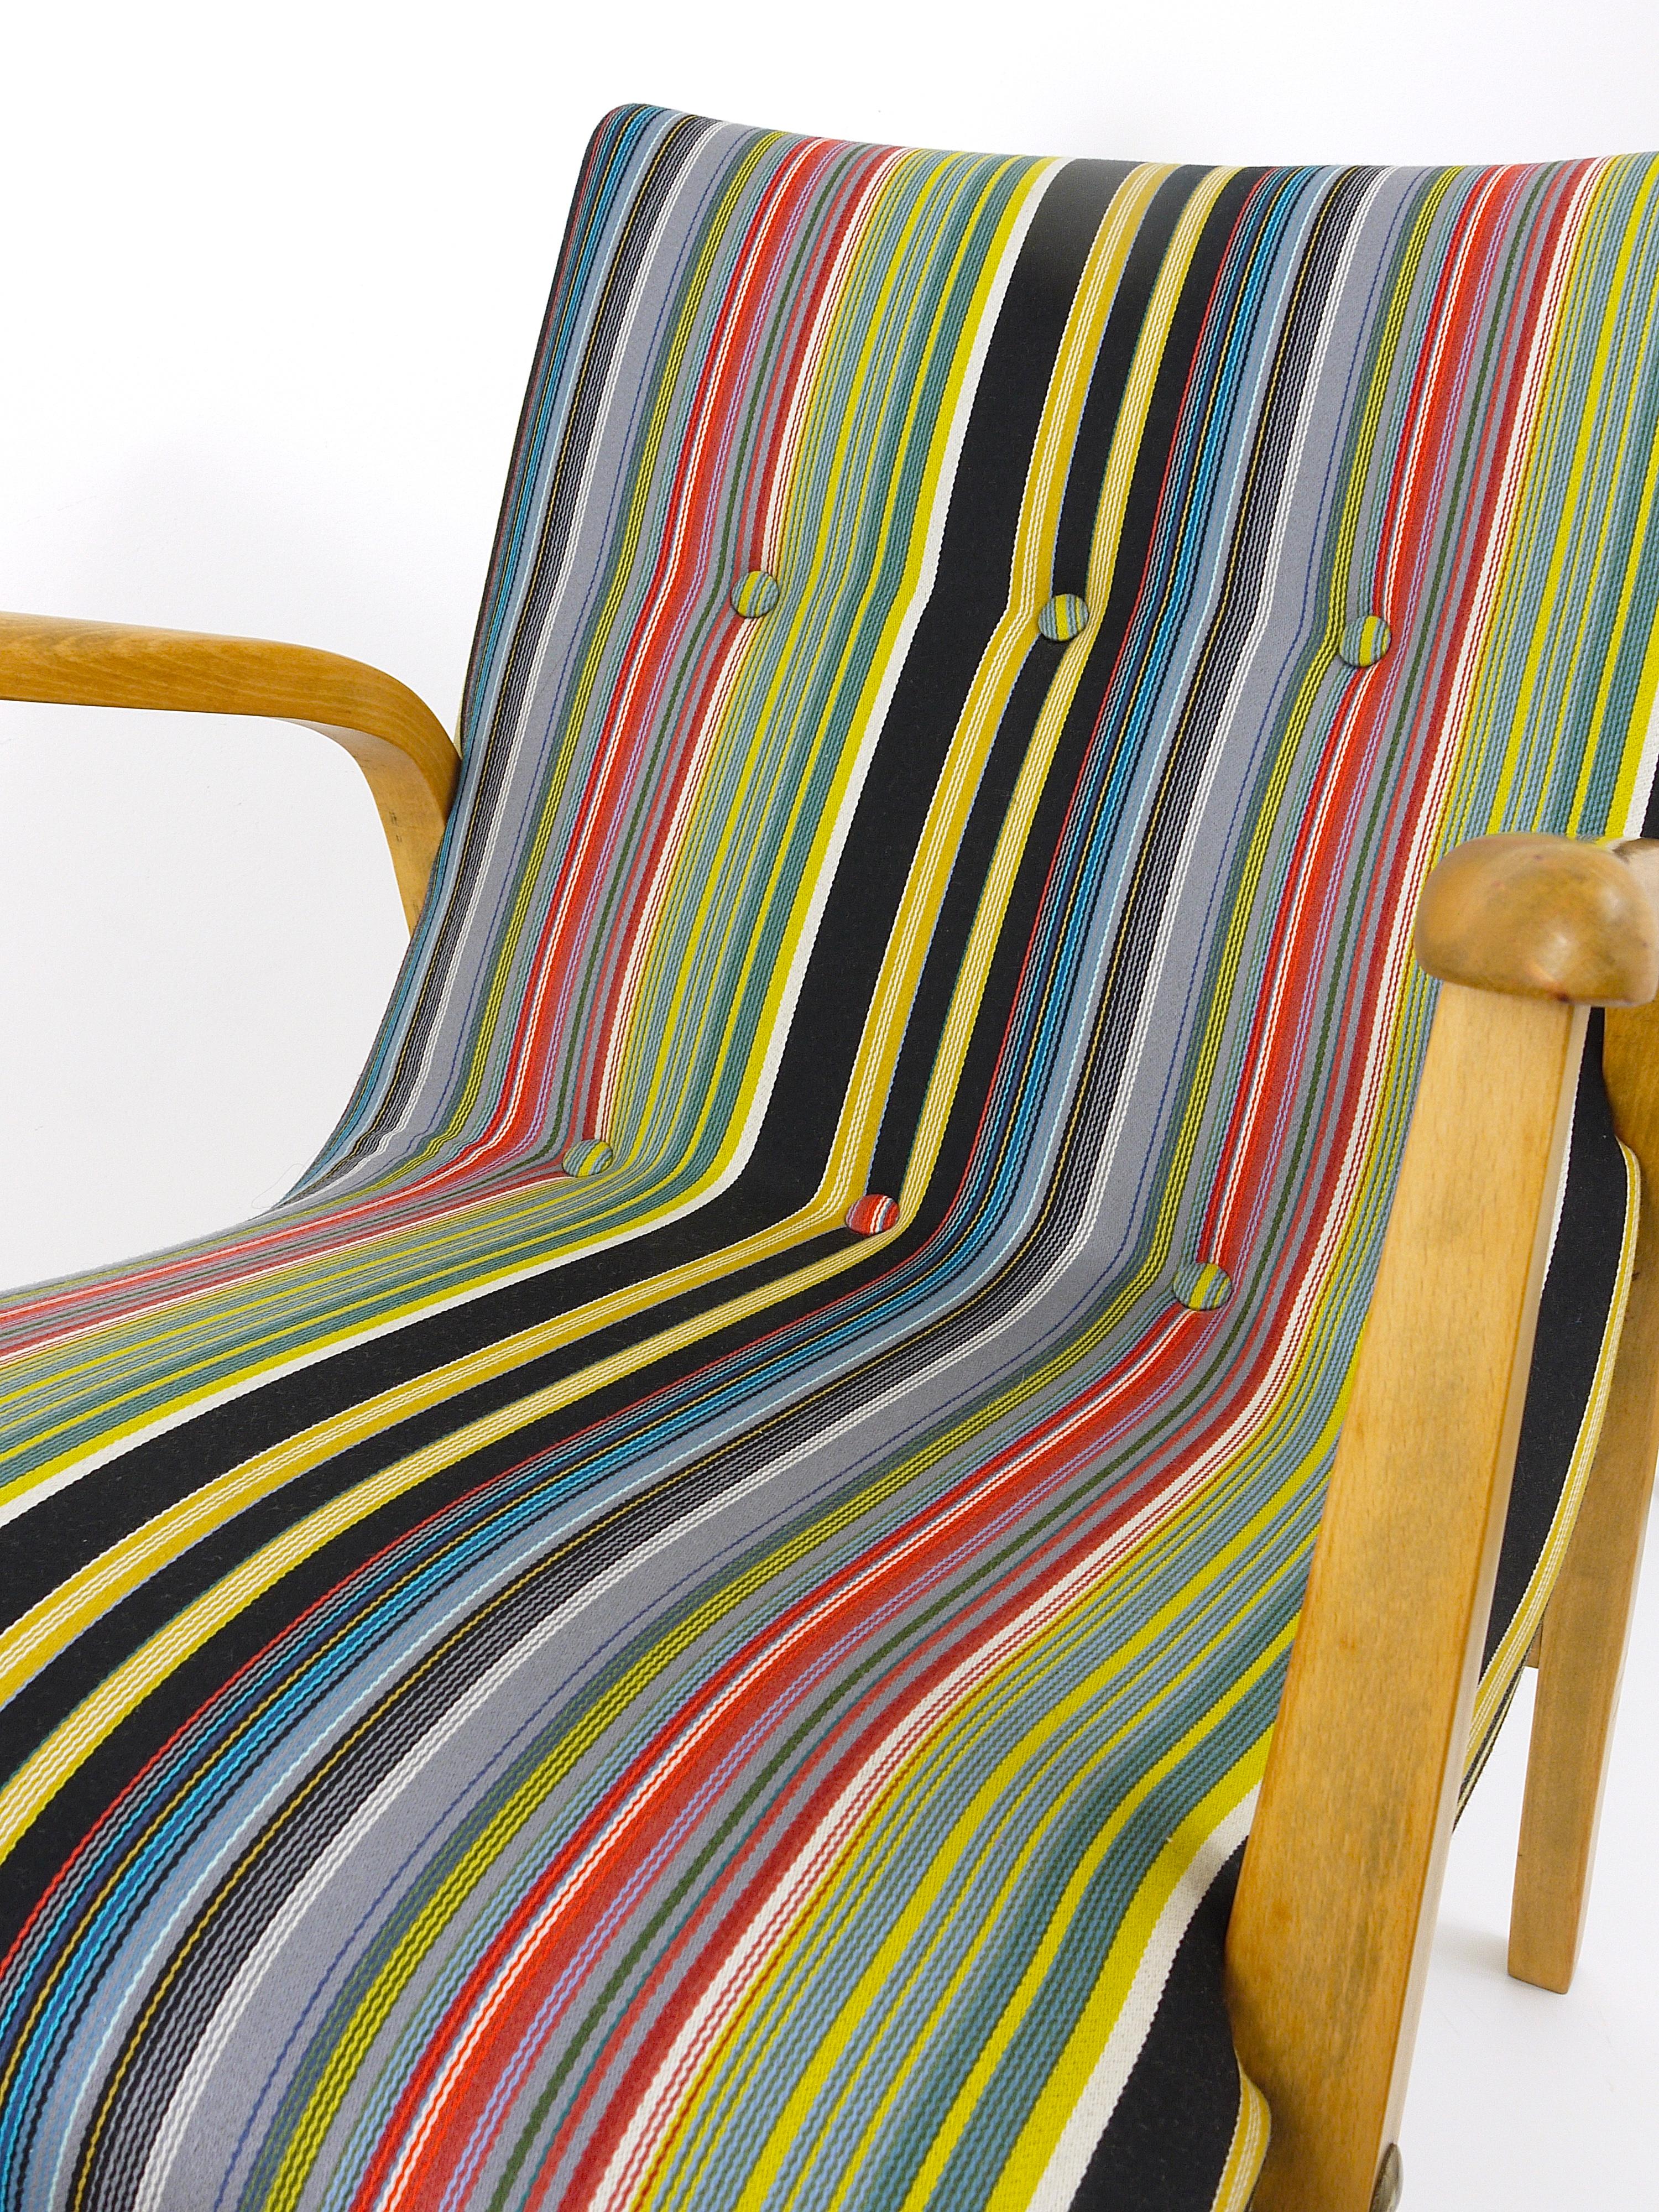 Mid-20th Century 1950s Roland Rainer Cafe Ritter Chair with Paul Smith Maharam Upholstery